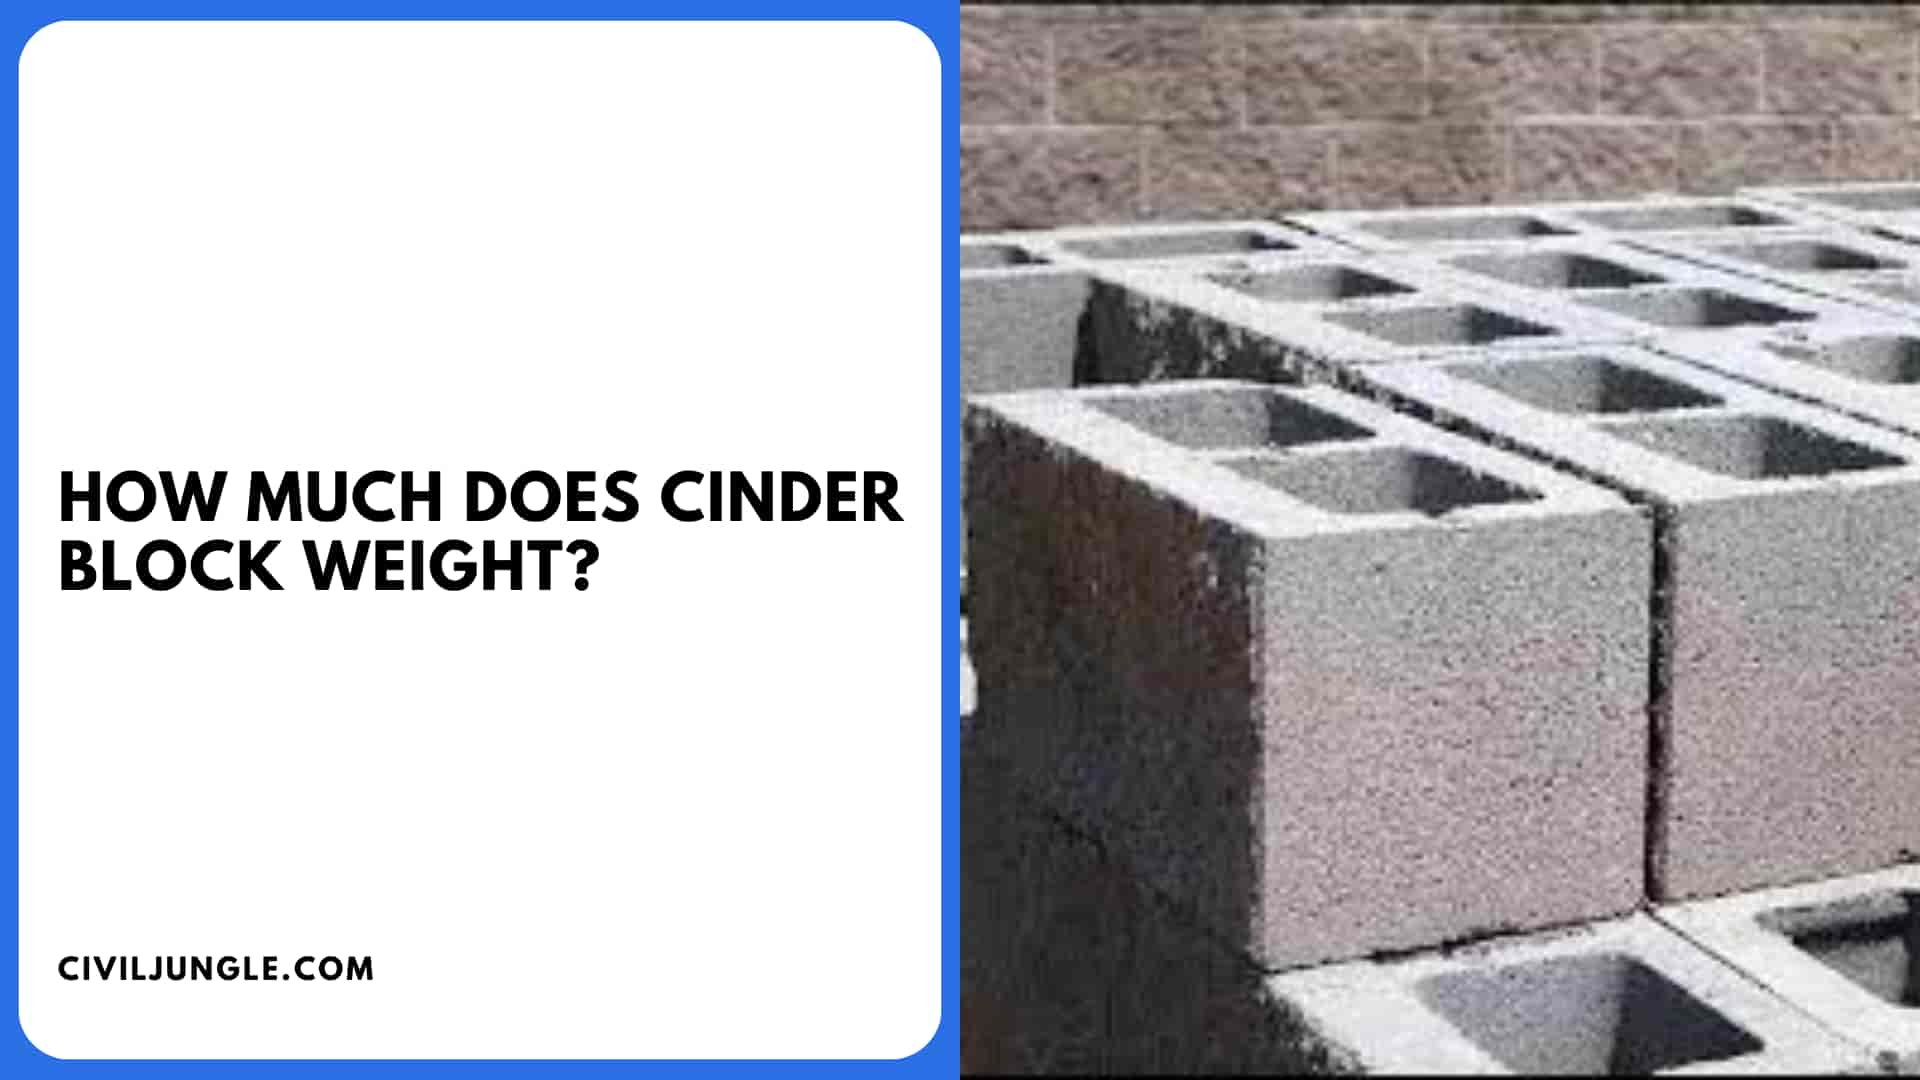 How Much Does Cinder Block Weight?